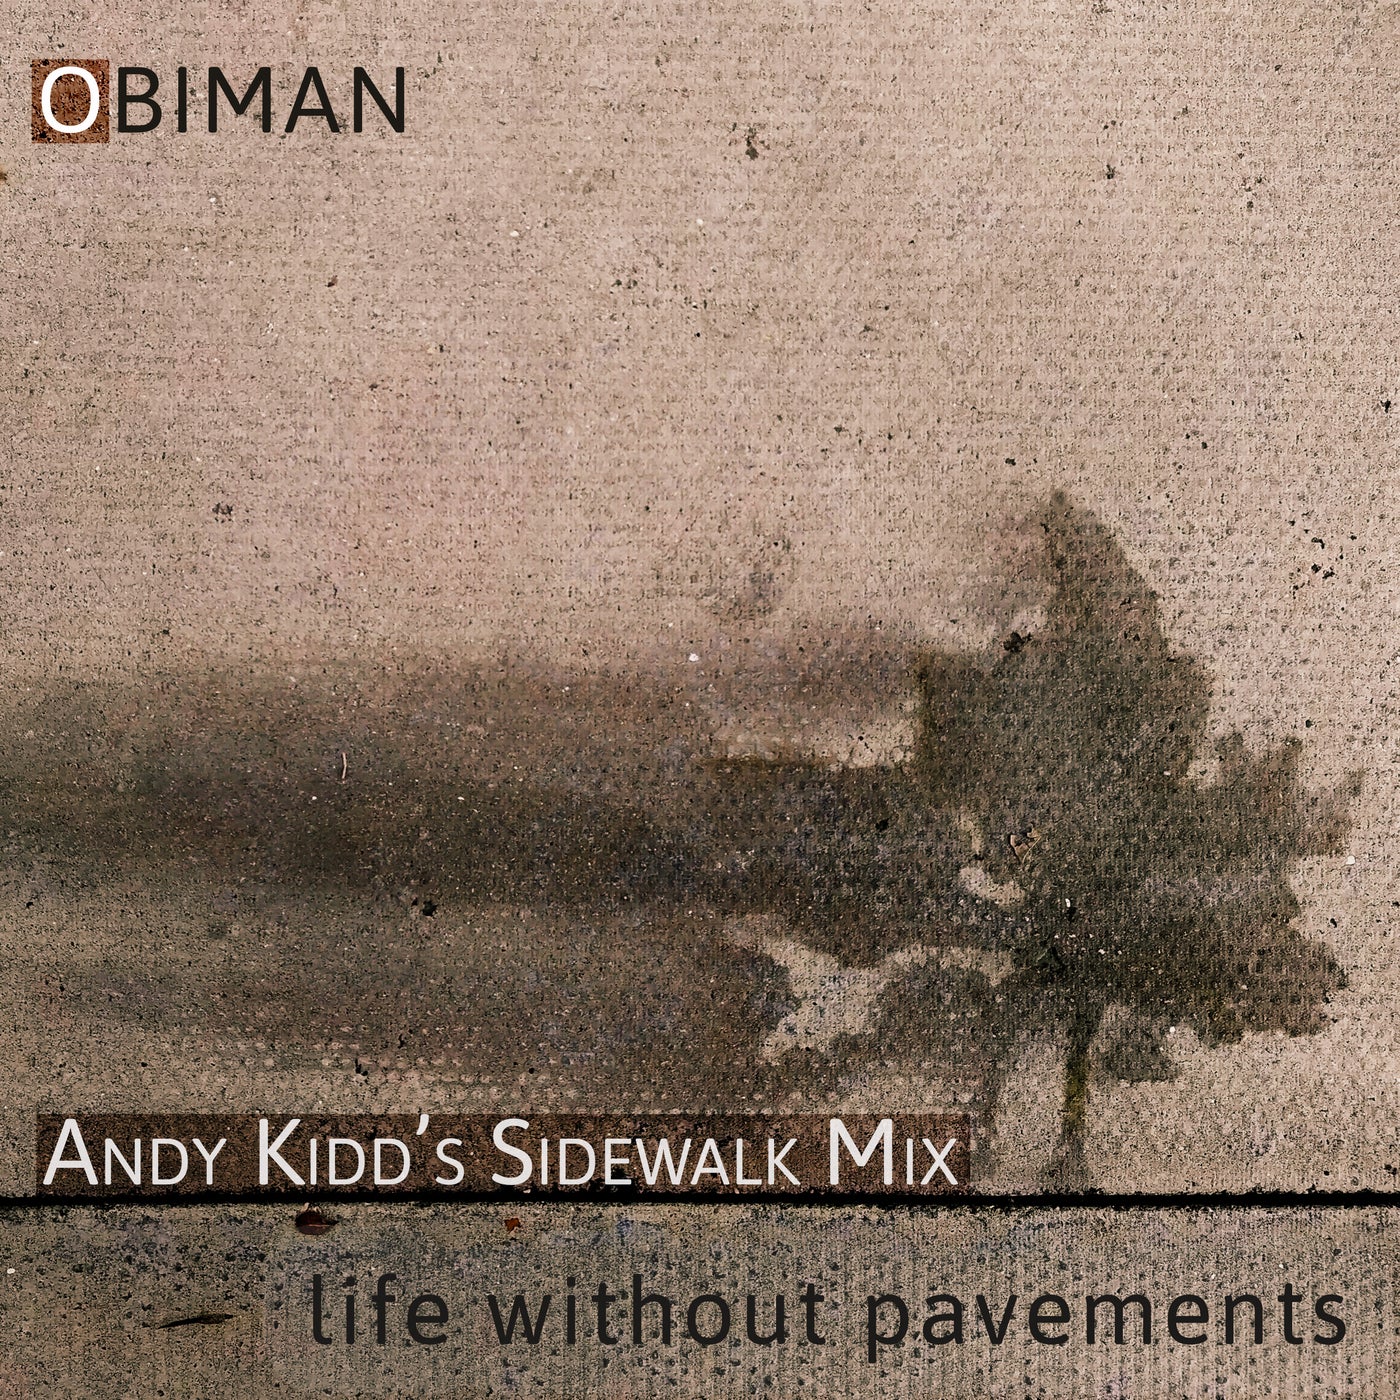 Life Without Pavements